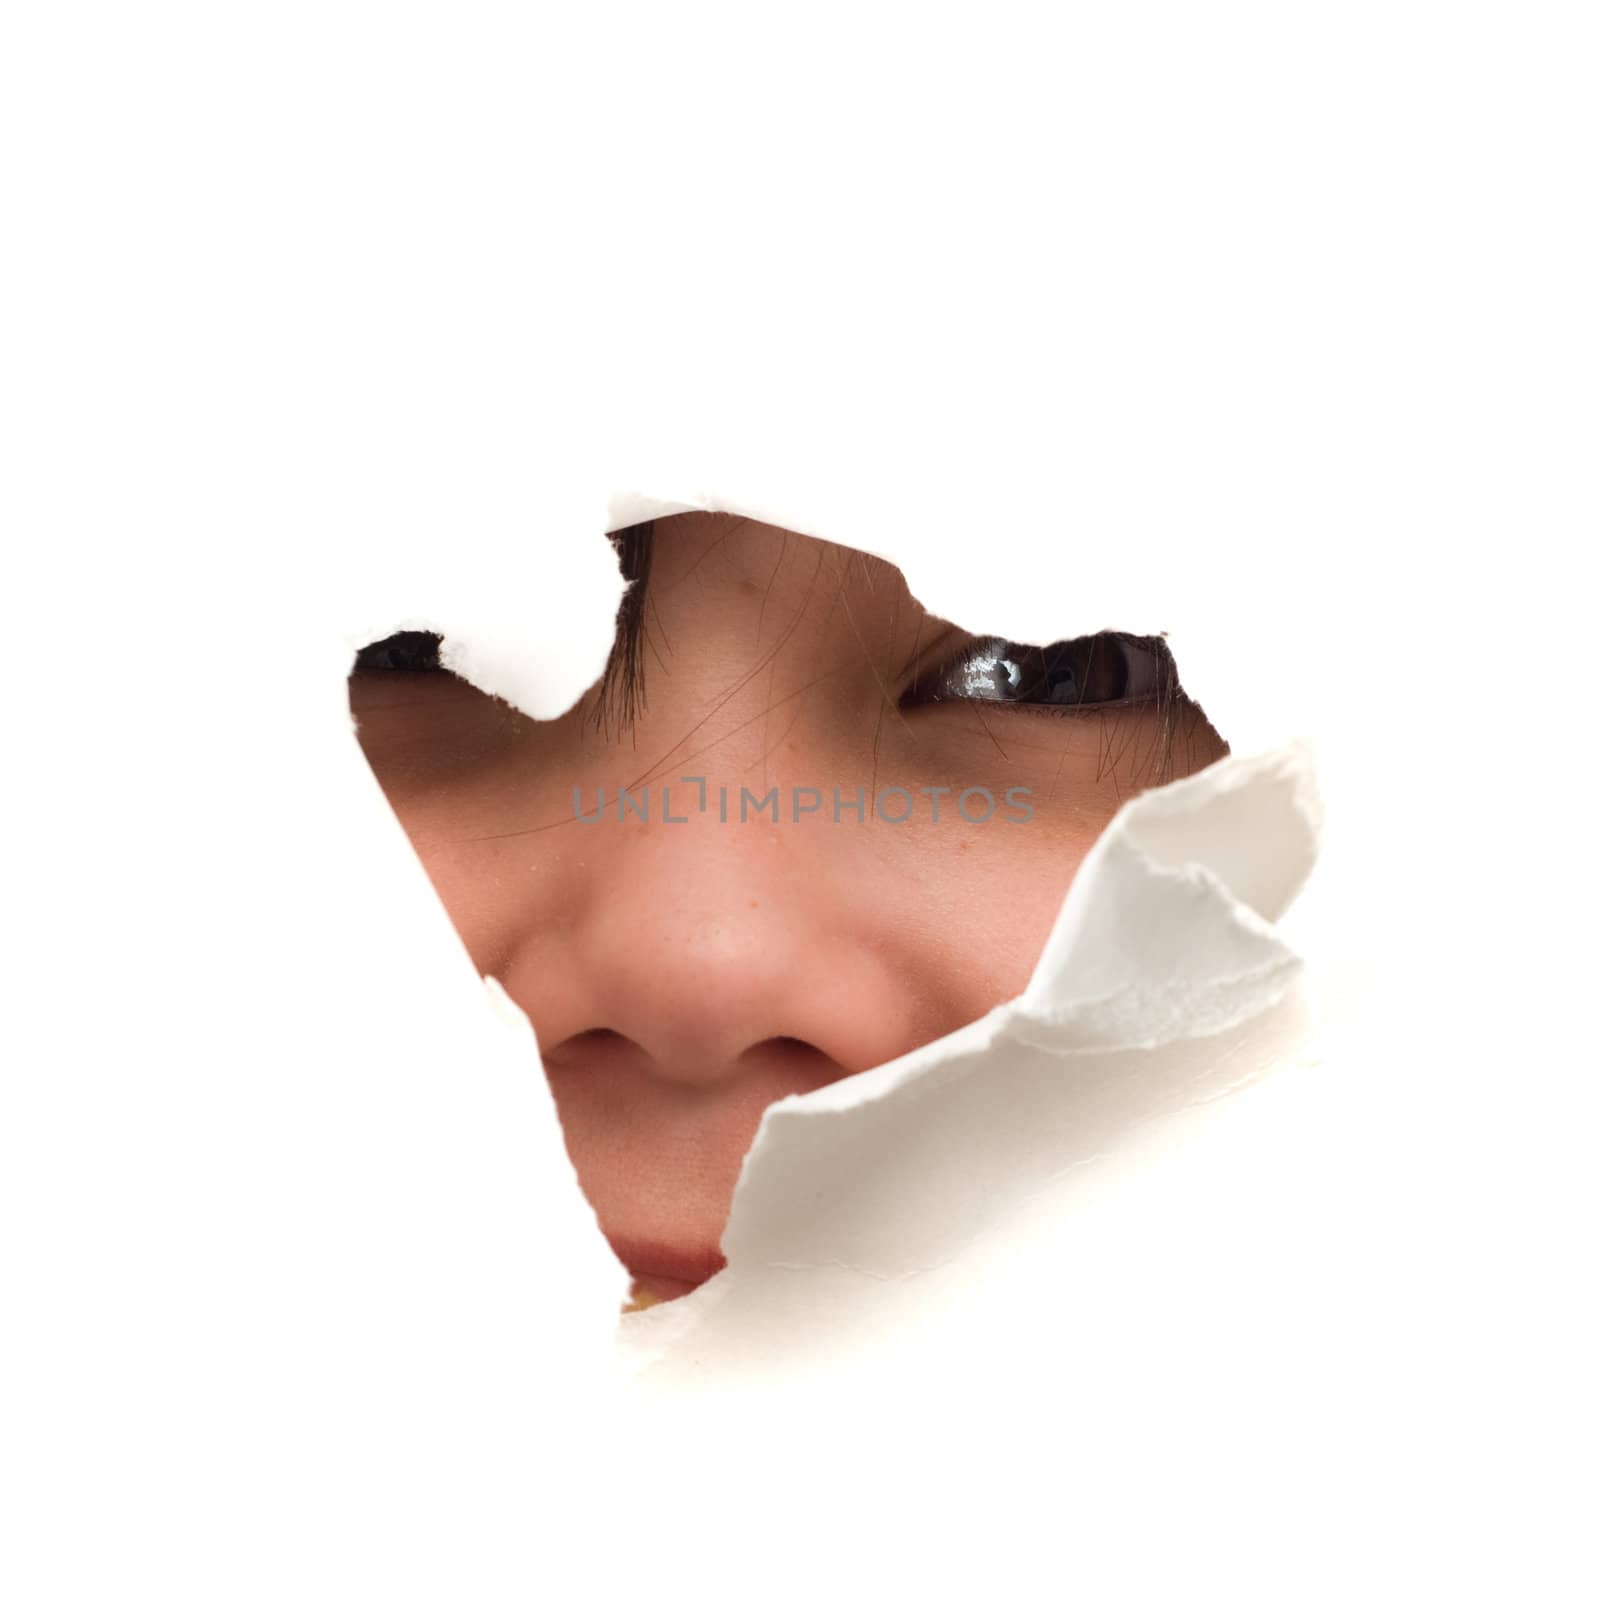 A childs face looking through a hole, isolated against a white background